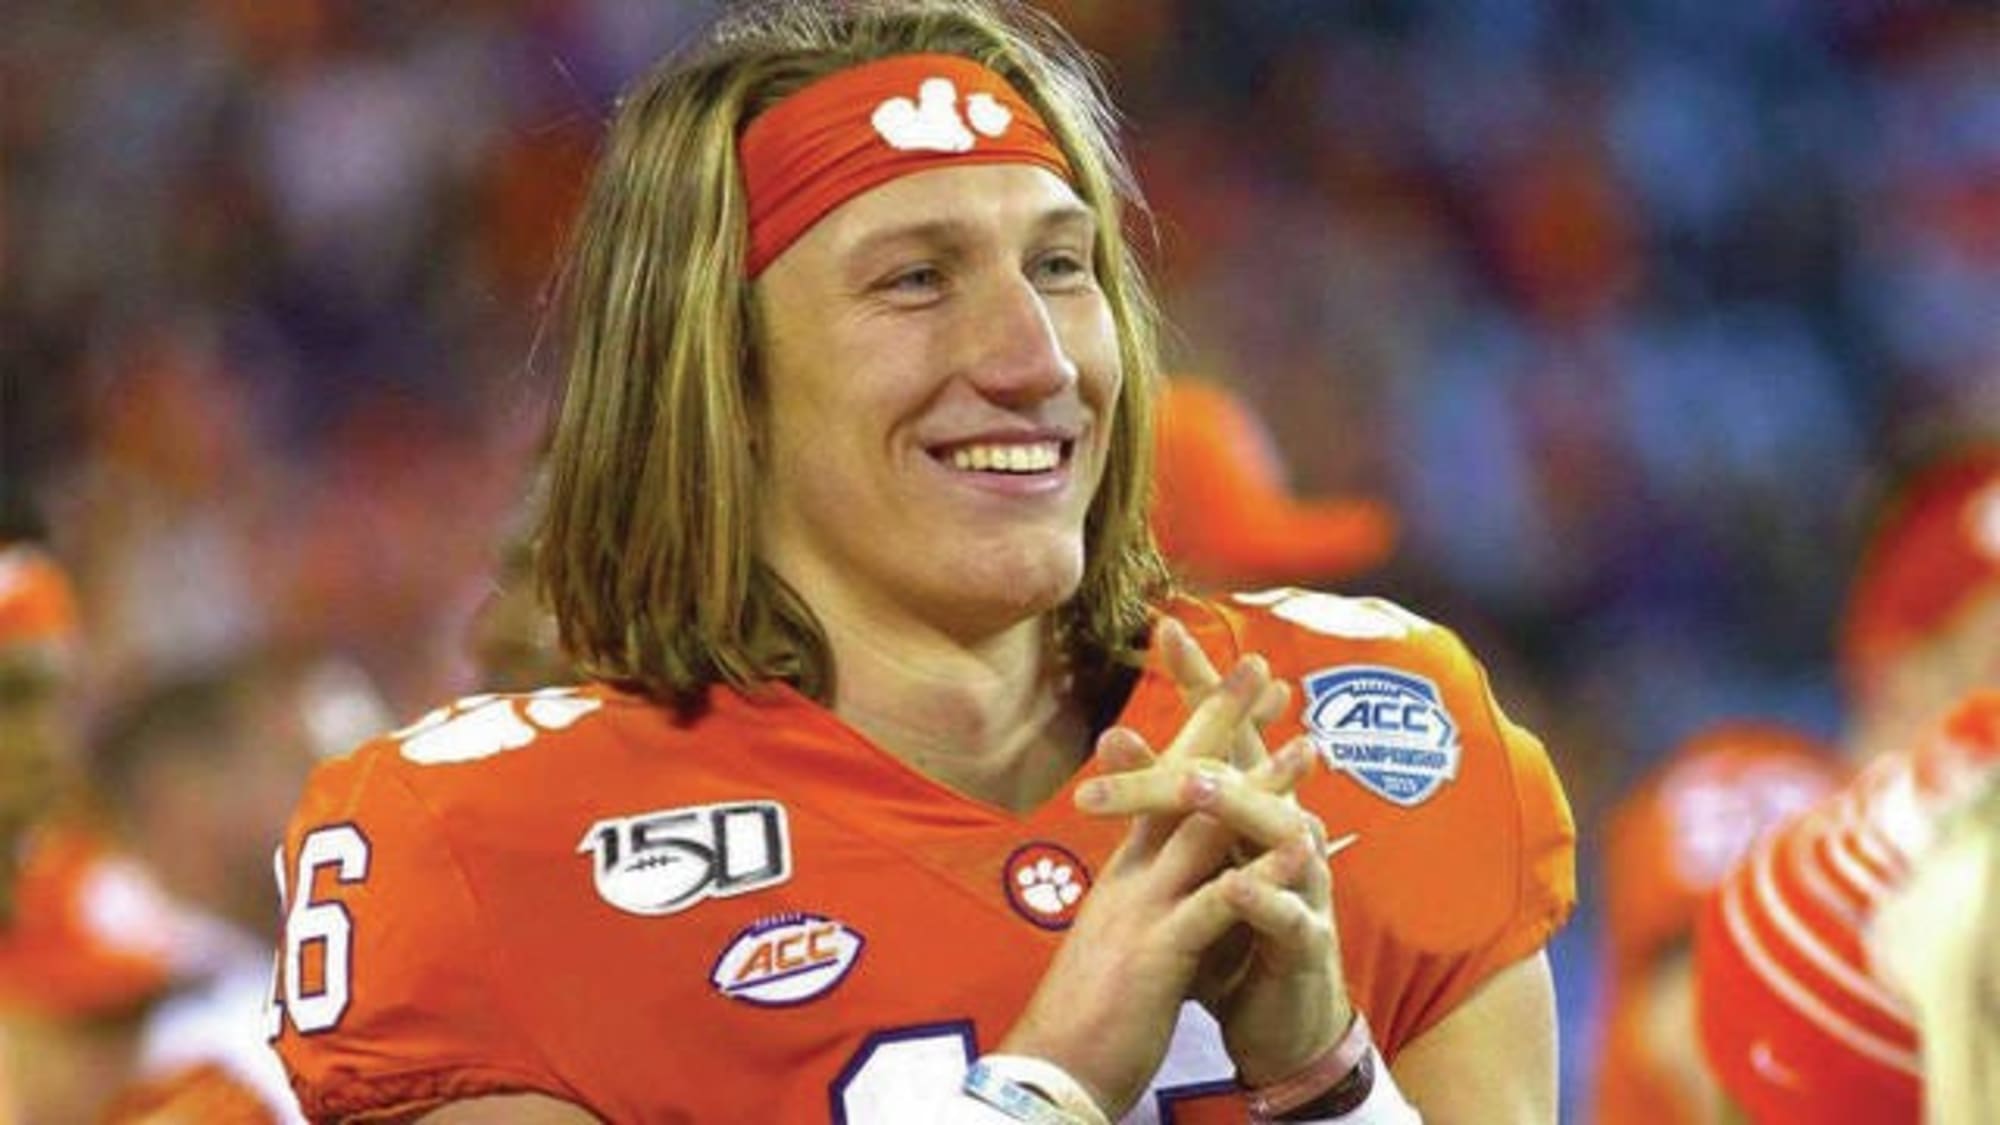 NFL Draft 2021: Trevor Lawrence is 'super excited to be a Jag' after being  selected as the No 1 overall pick, NFL News